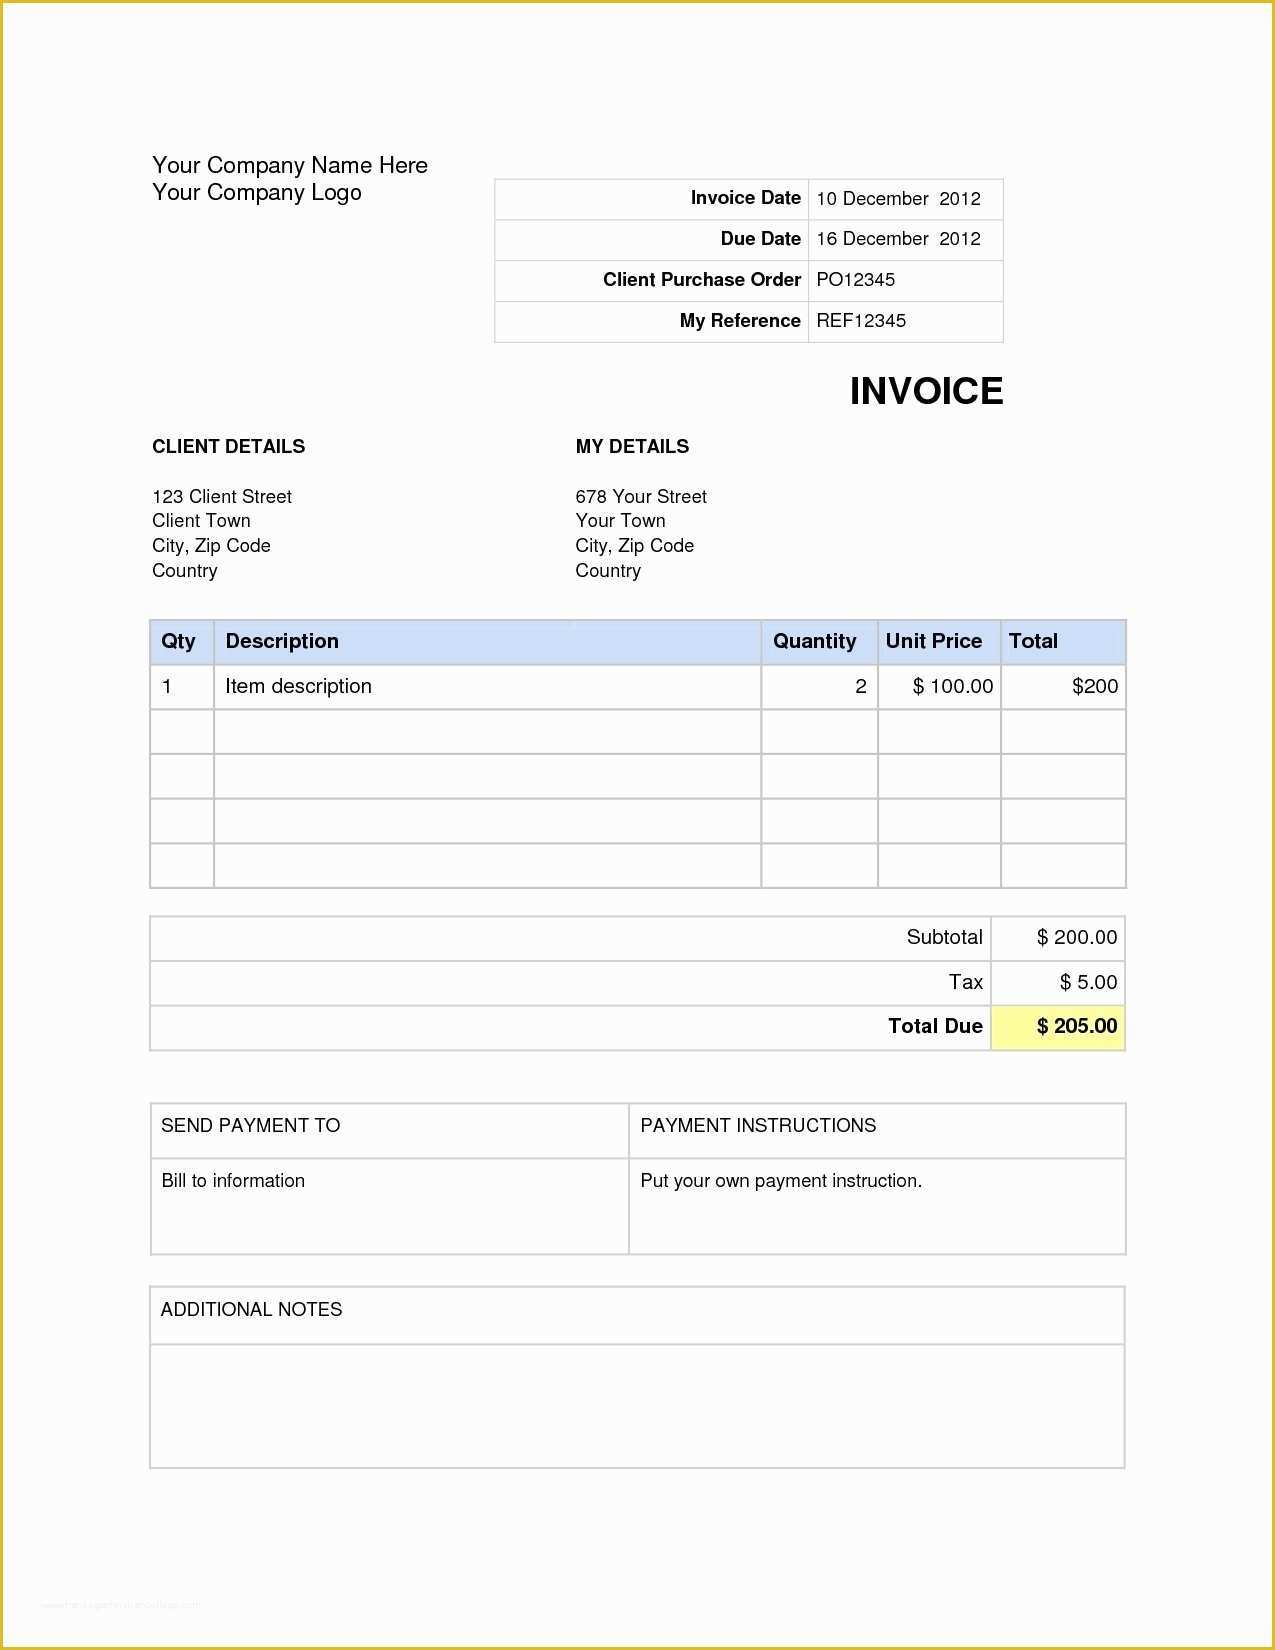 Microsoft Office Free Invoice Template Of Microsoft Fice Templates Invoice Invoice Design